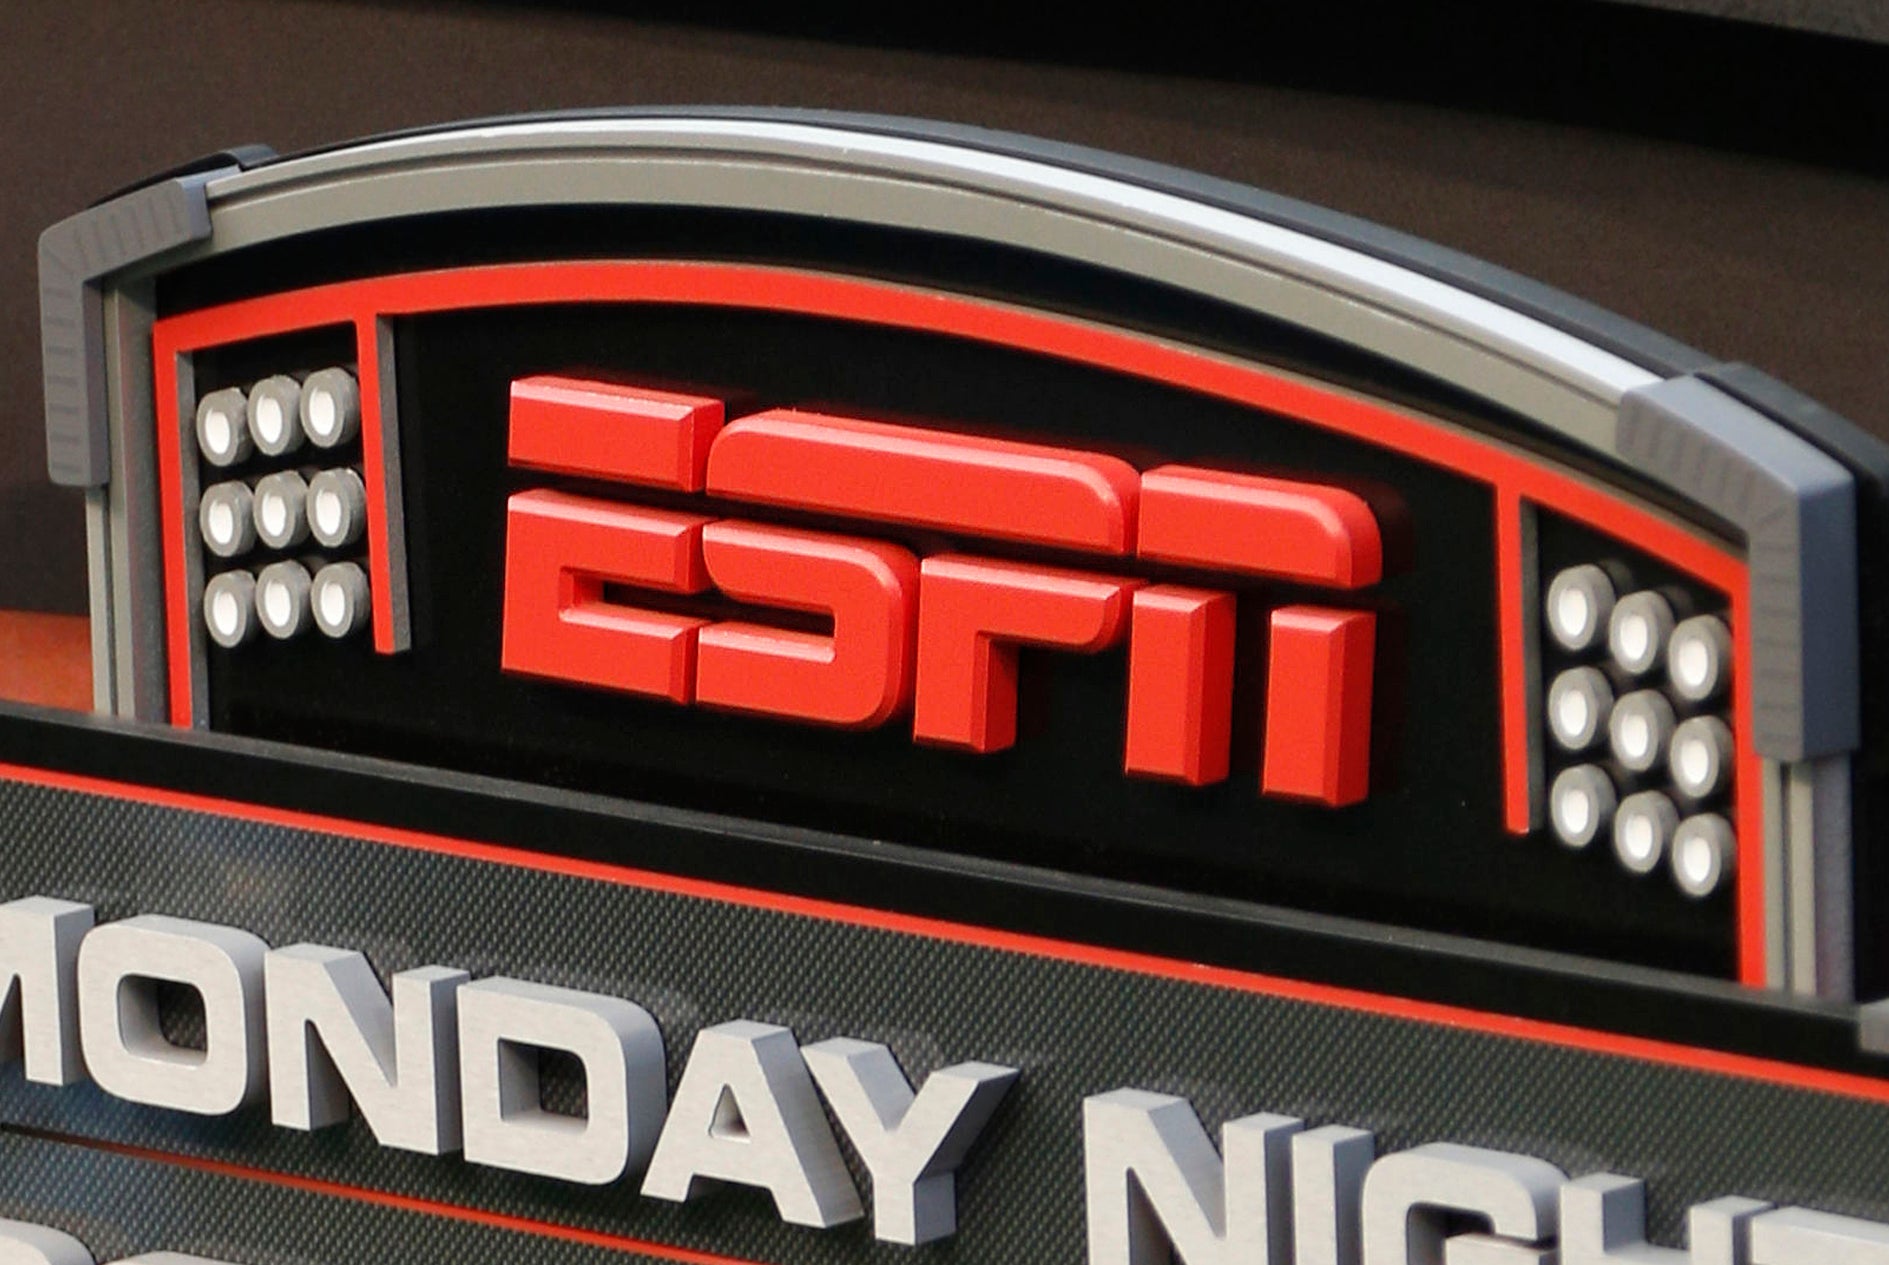 ESPN, Disney Take Next Tech Leap in Kids-Focused Broadcast With